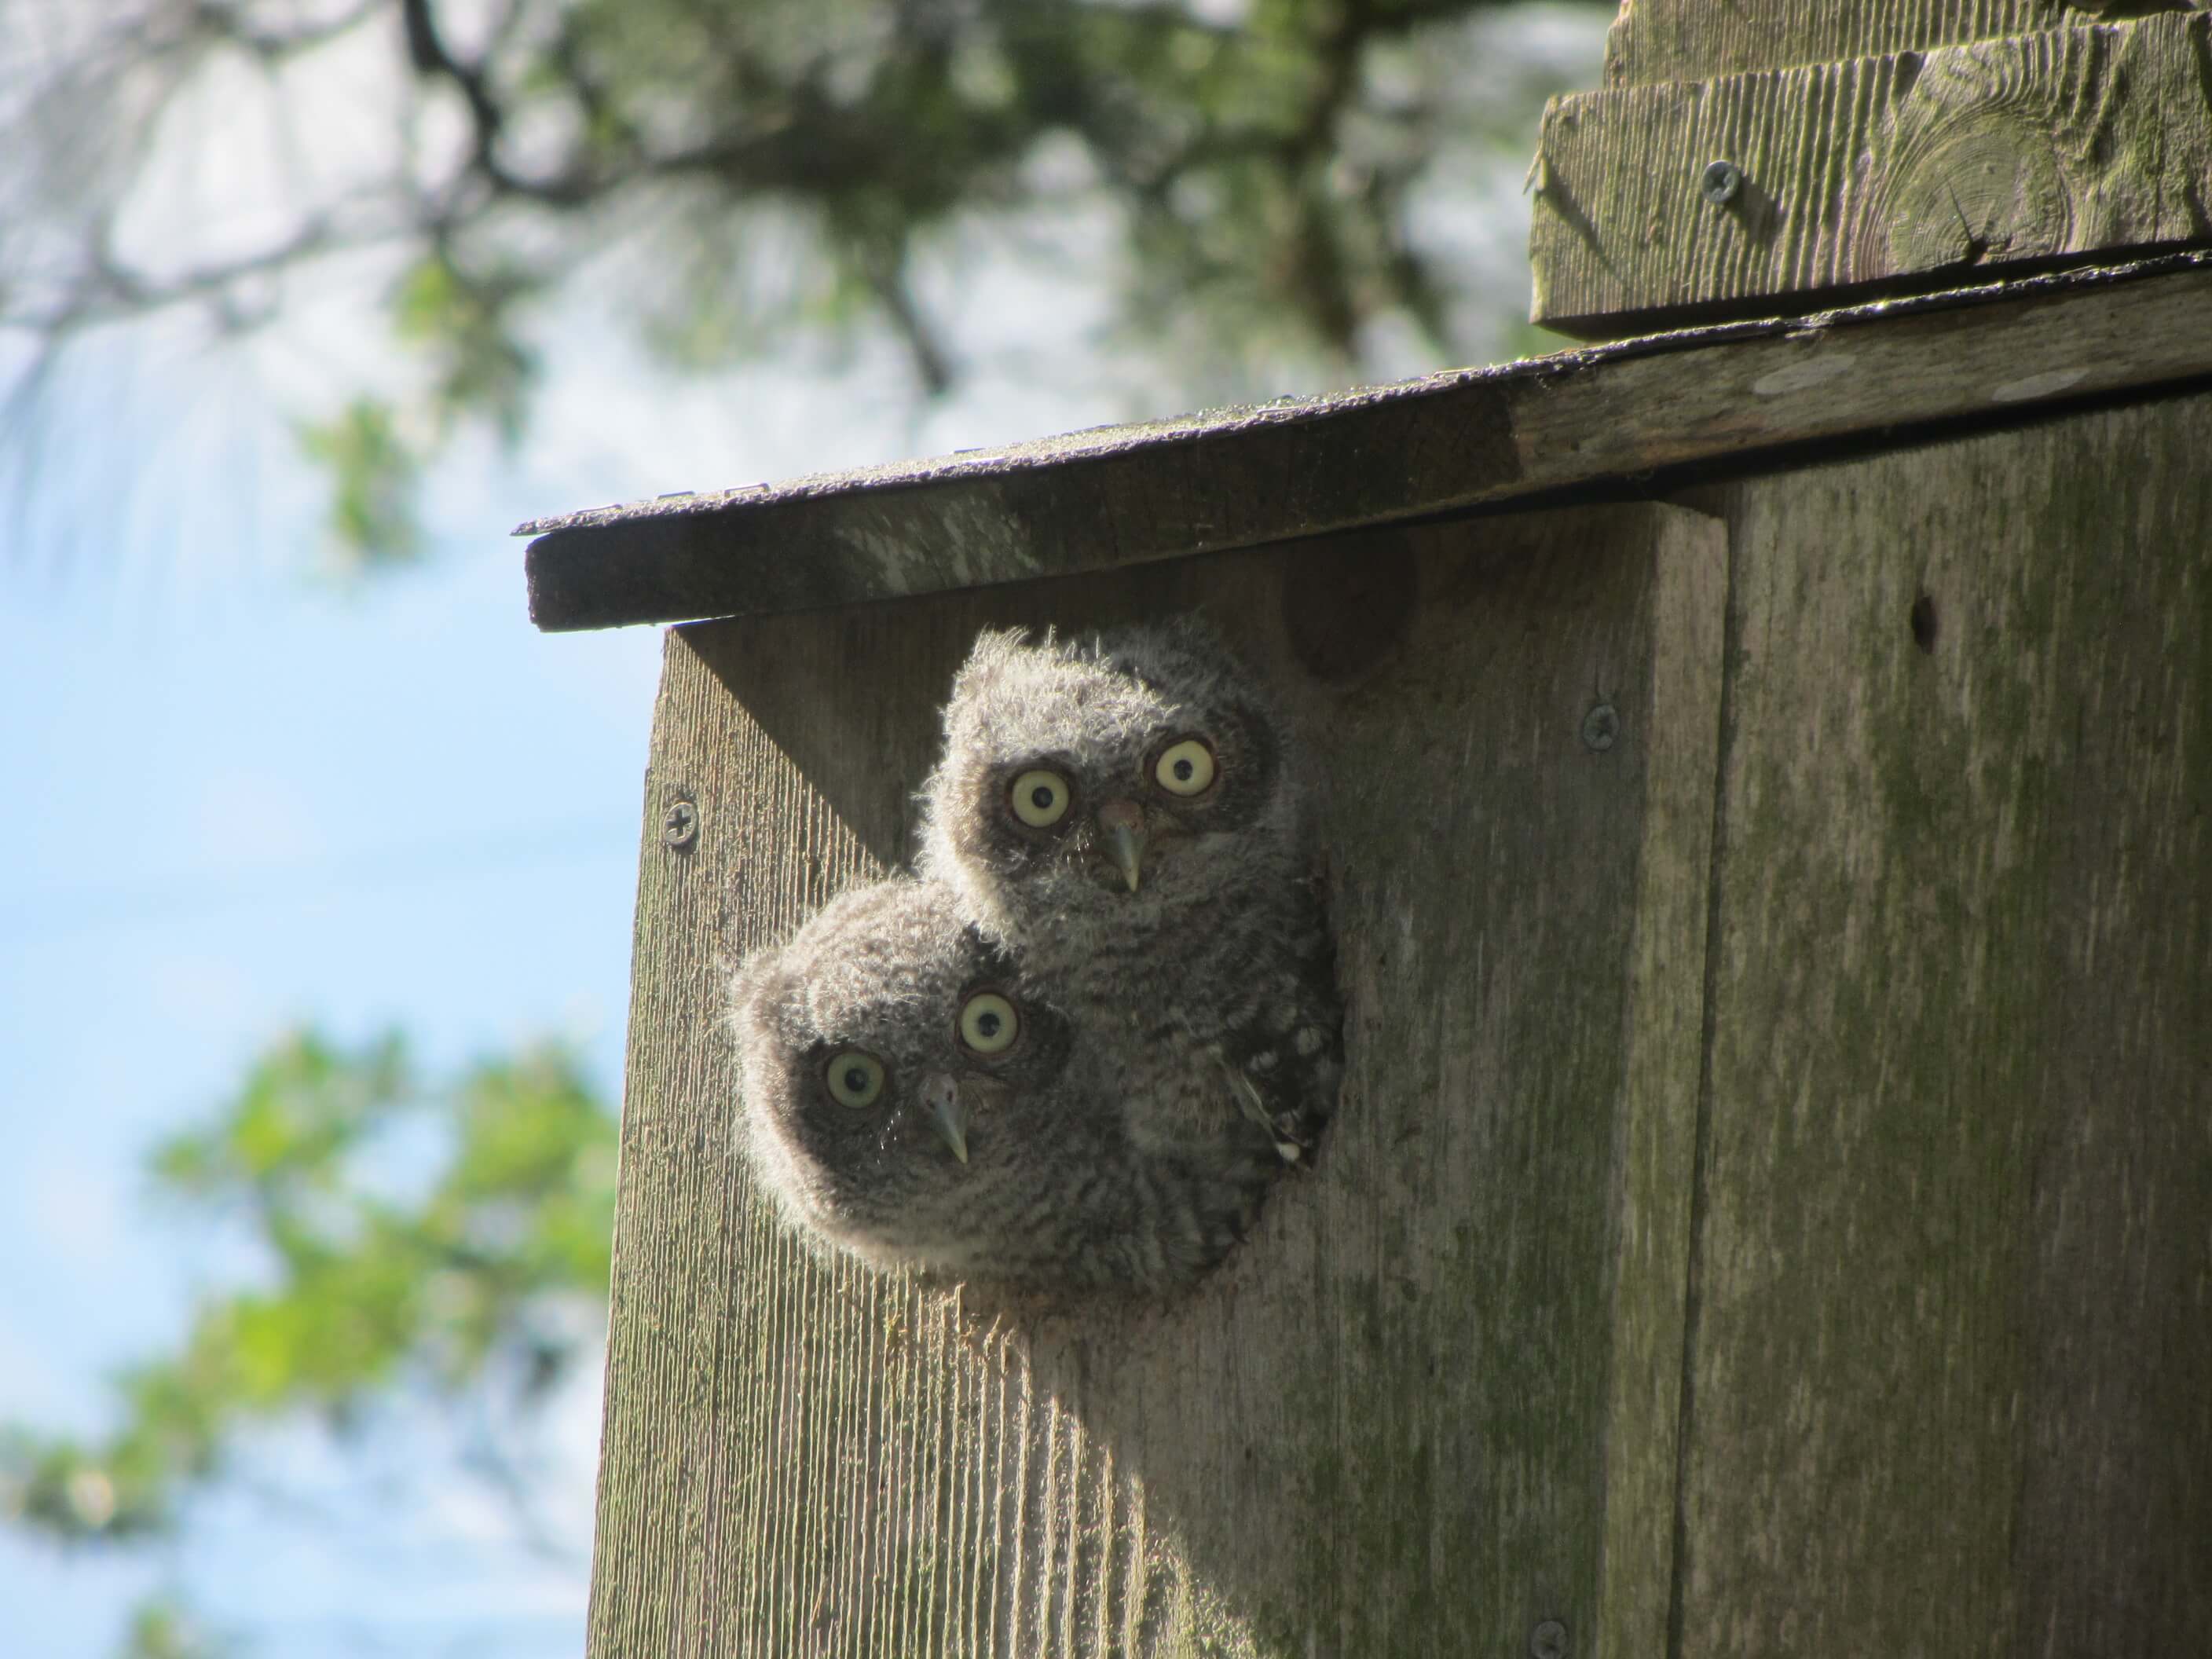 photo of two baby owls poking their heads out of a bird house